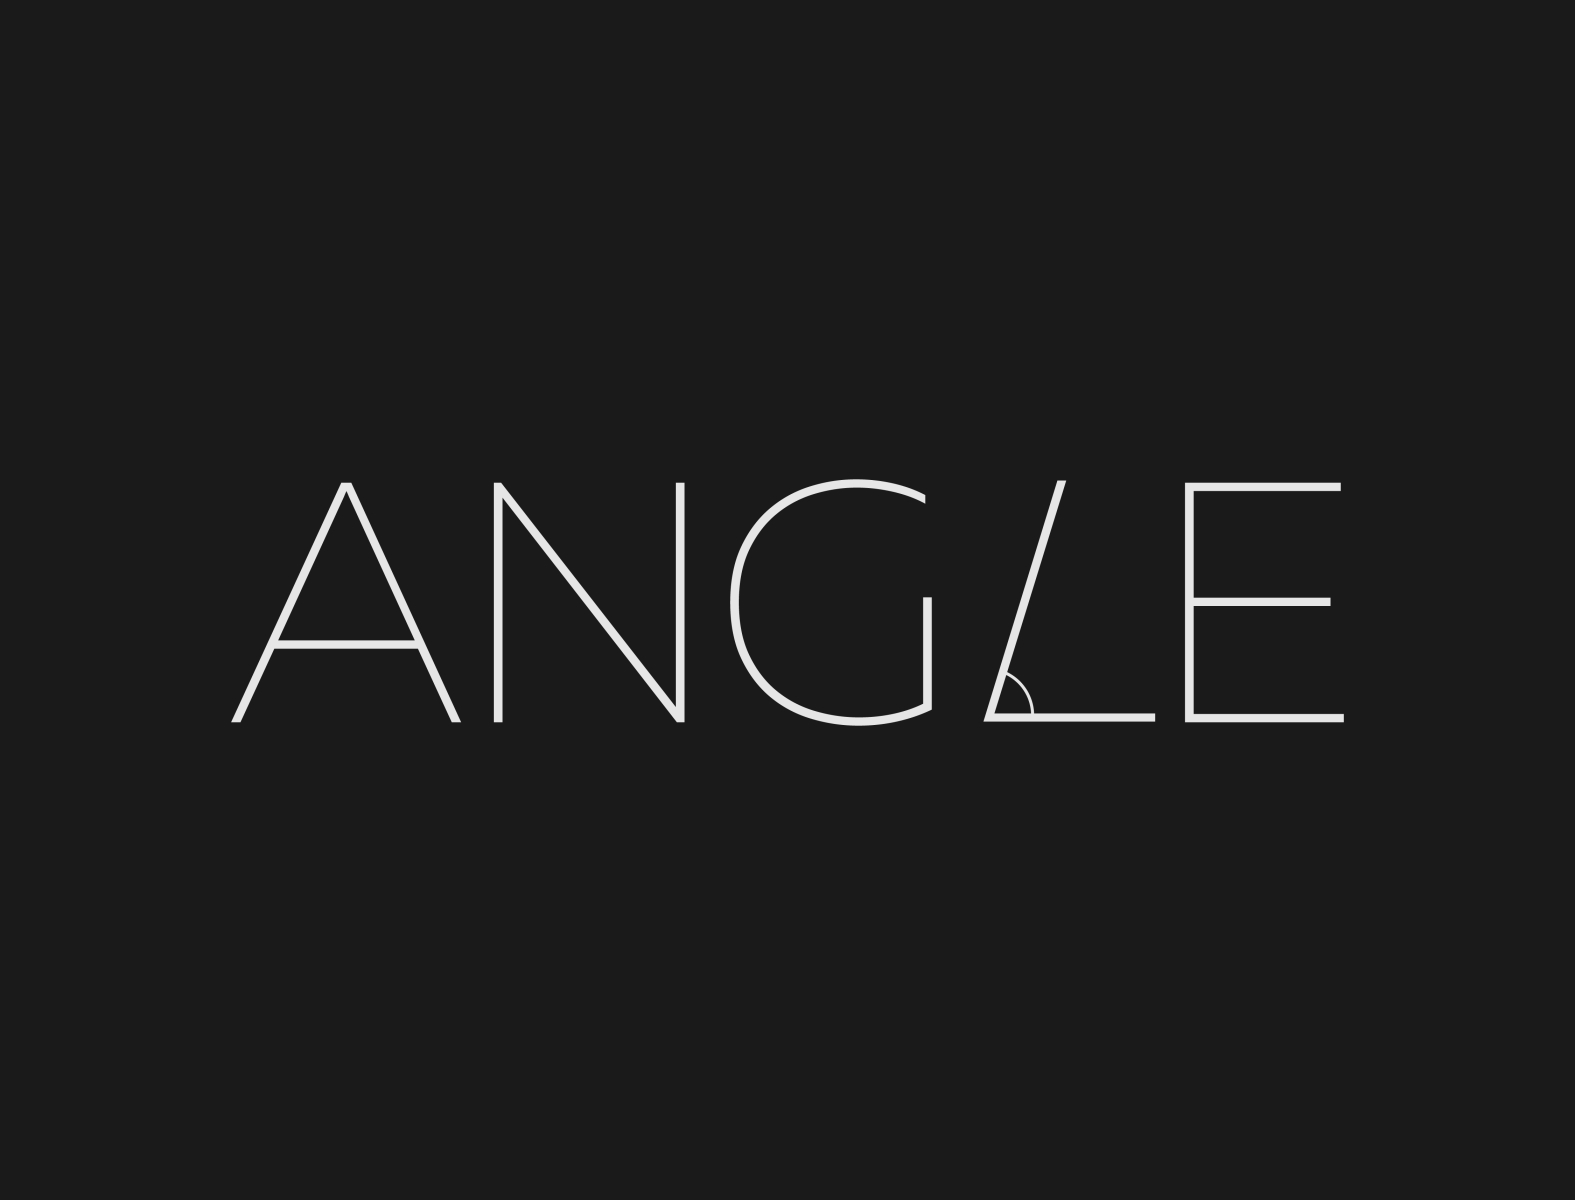 Angle Logo Concept by MyGraphicLab on Dribbble